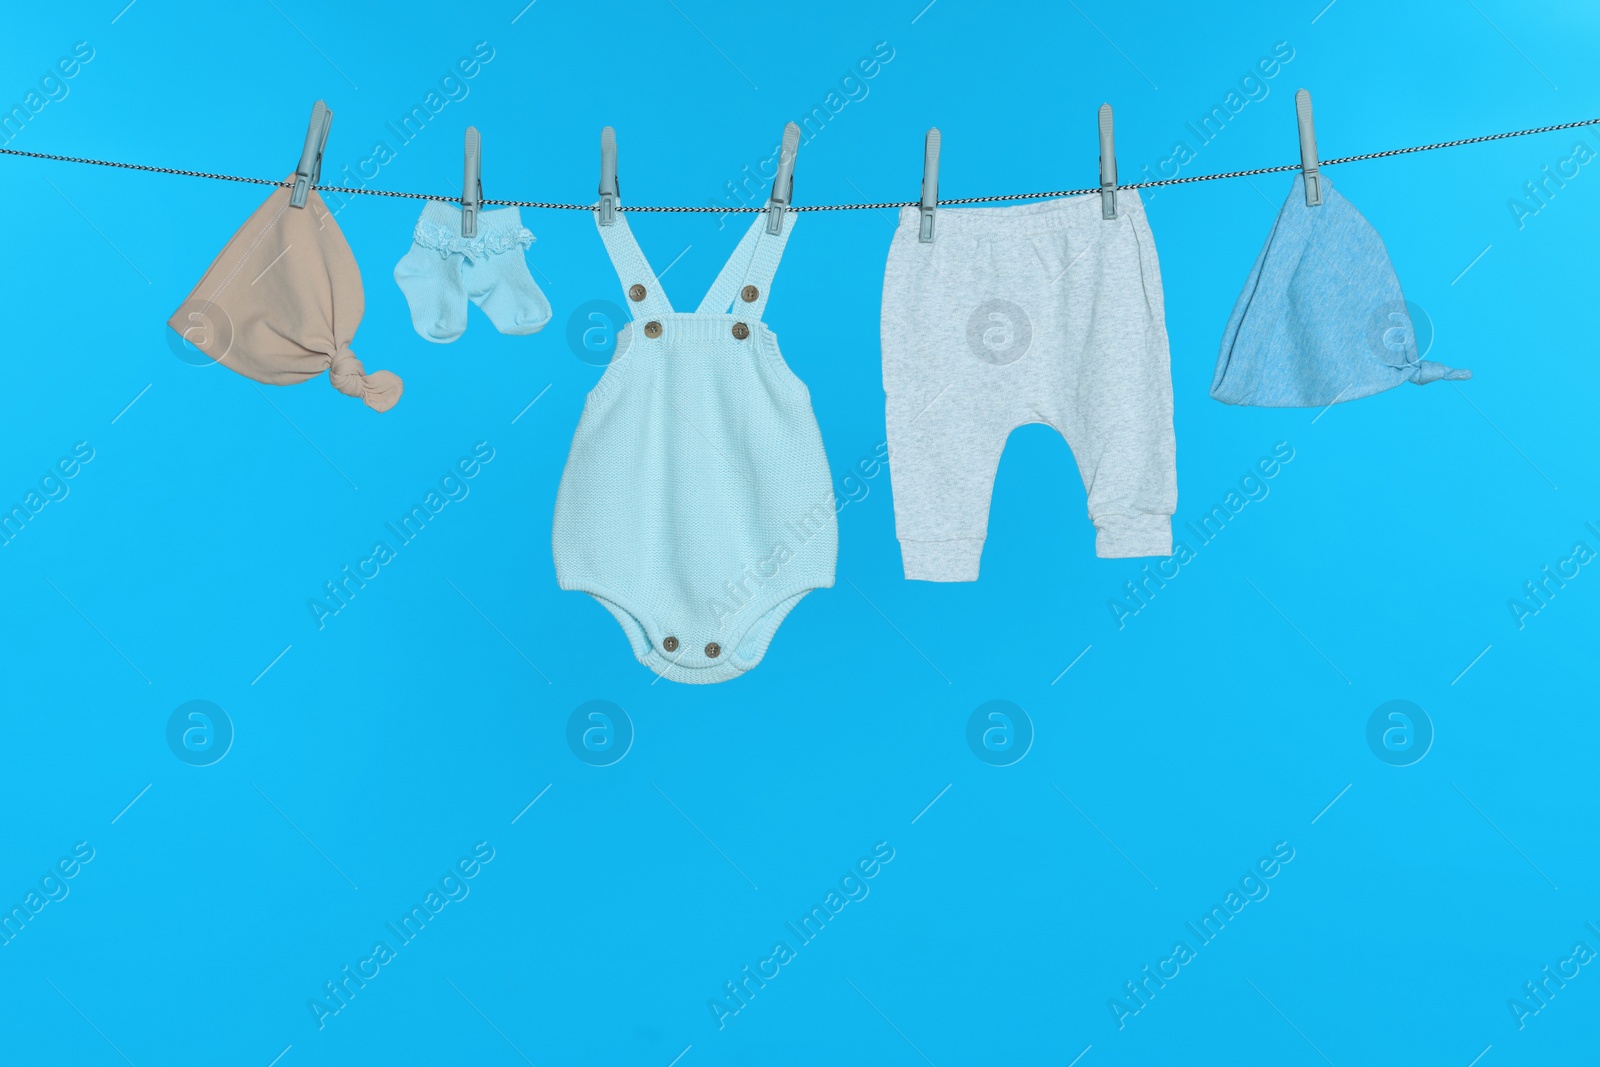 Photo of Different baby clothes drying on laundry line against light blue background